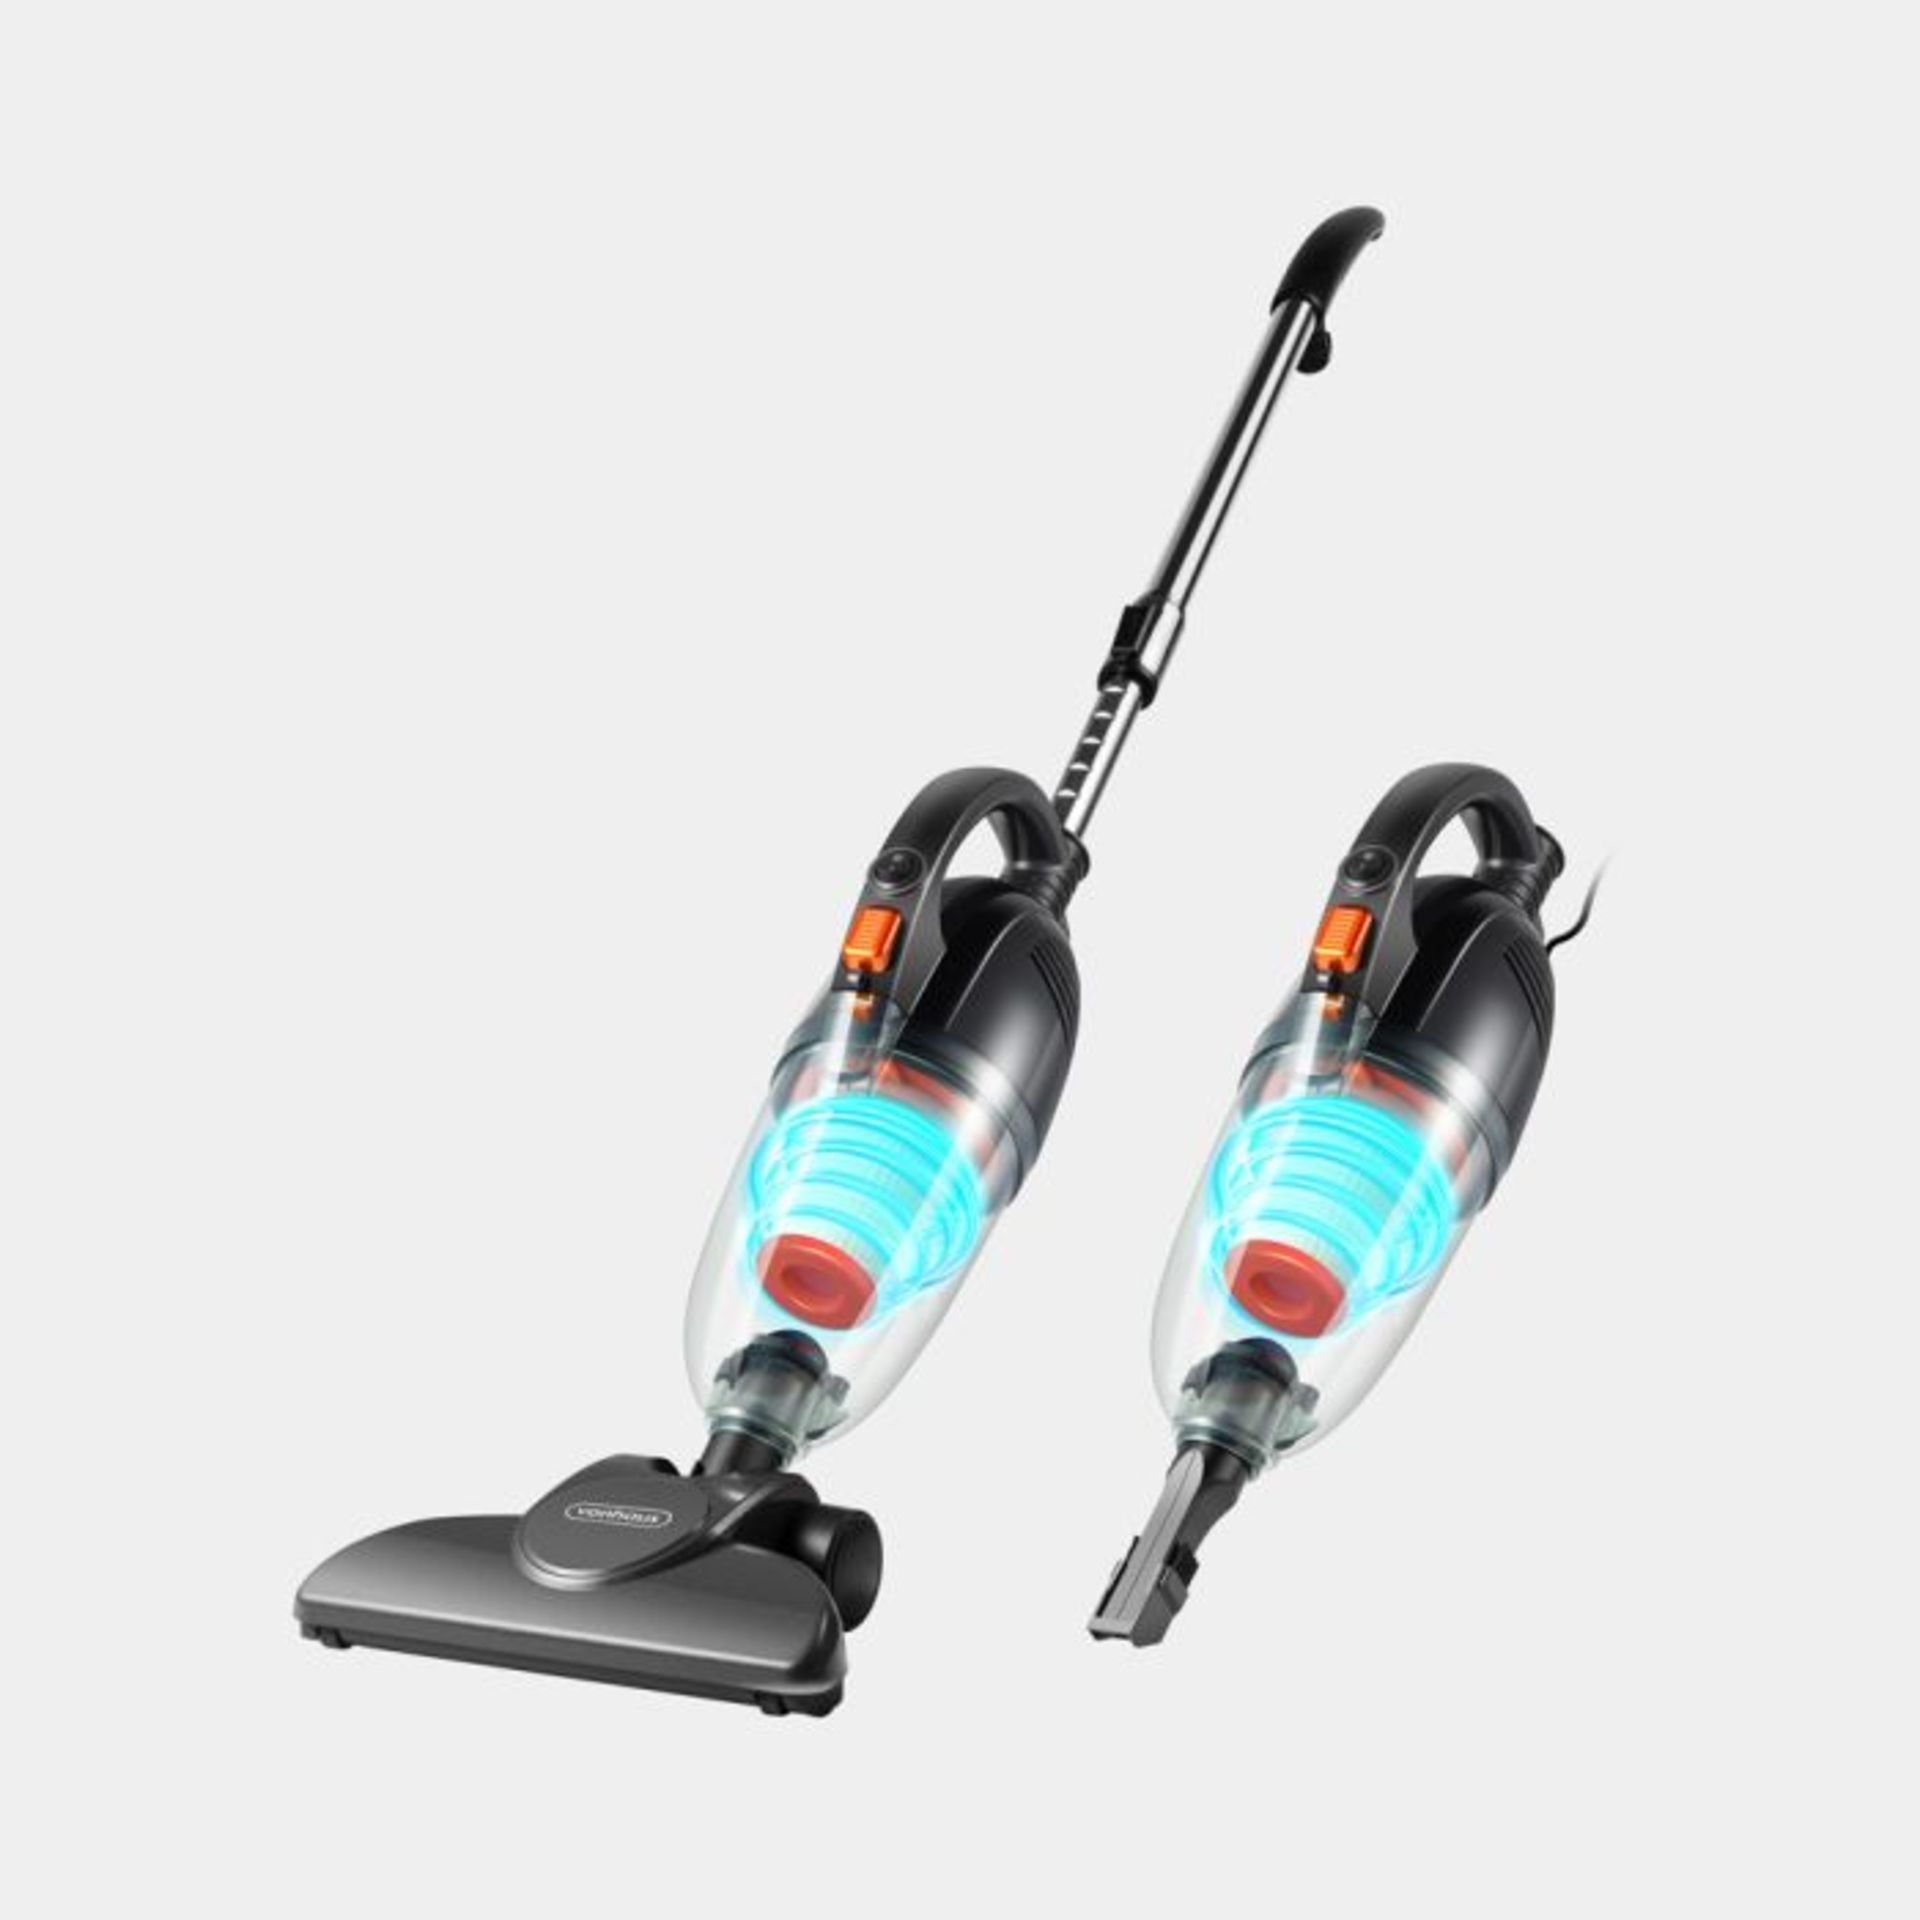 800W Grey 2 in 1 Stick Vacuum. - ER51. Featuring a super lightweight construction and a low